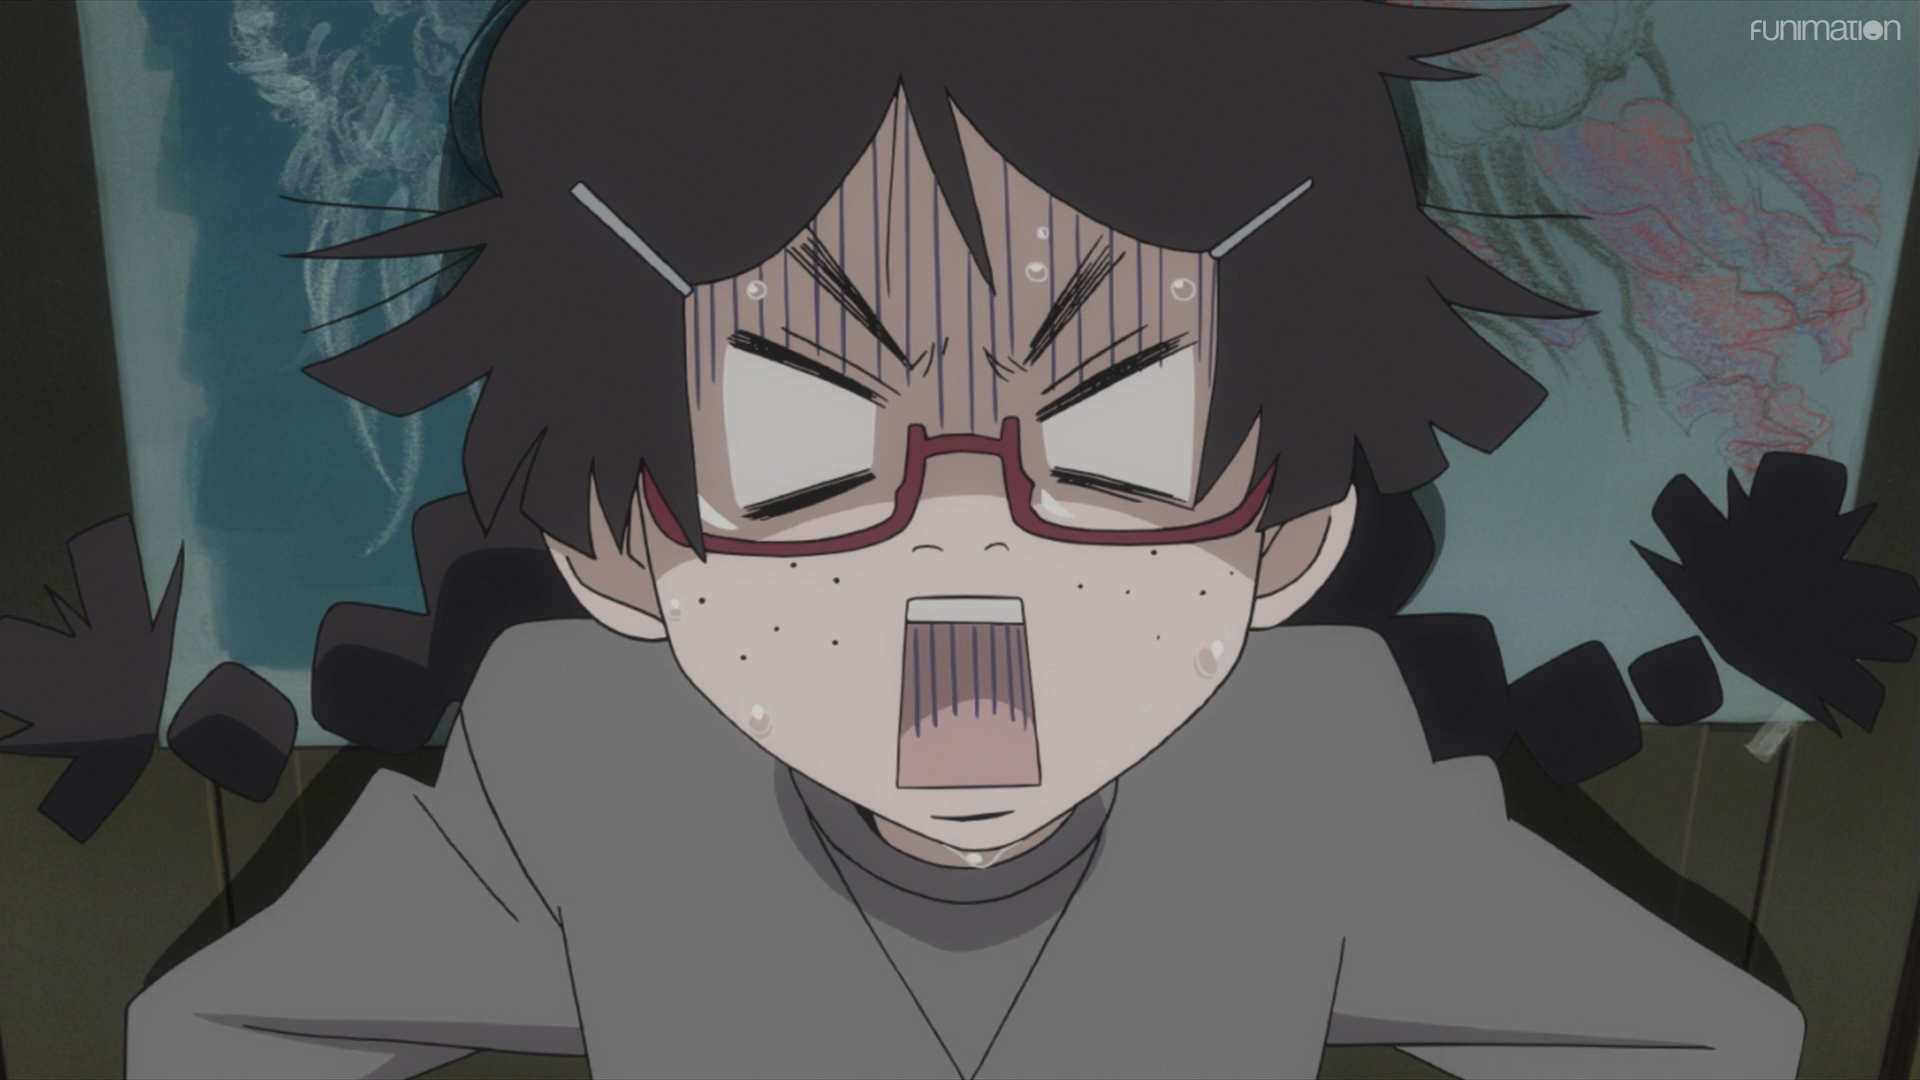 Tsukimi is shocked to discover Kuranosuke is a young man in drag in a scene from the Princess Jellyfish TV anime.